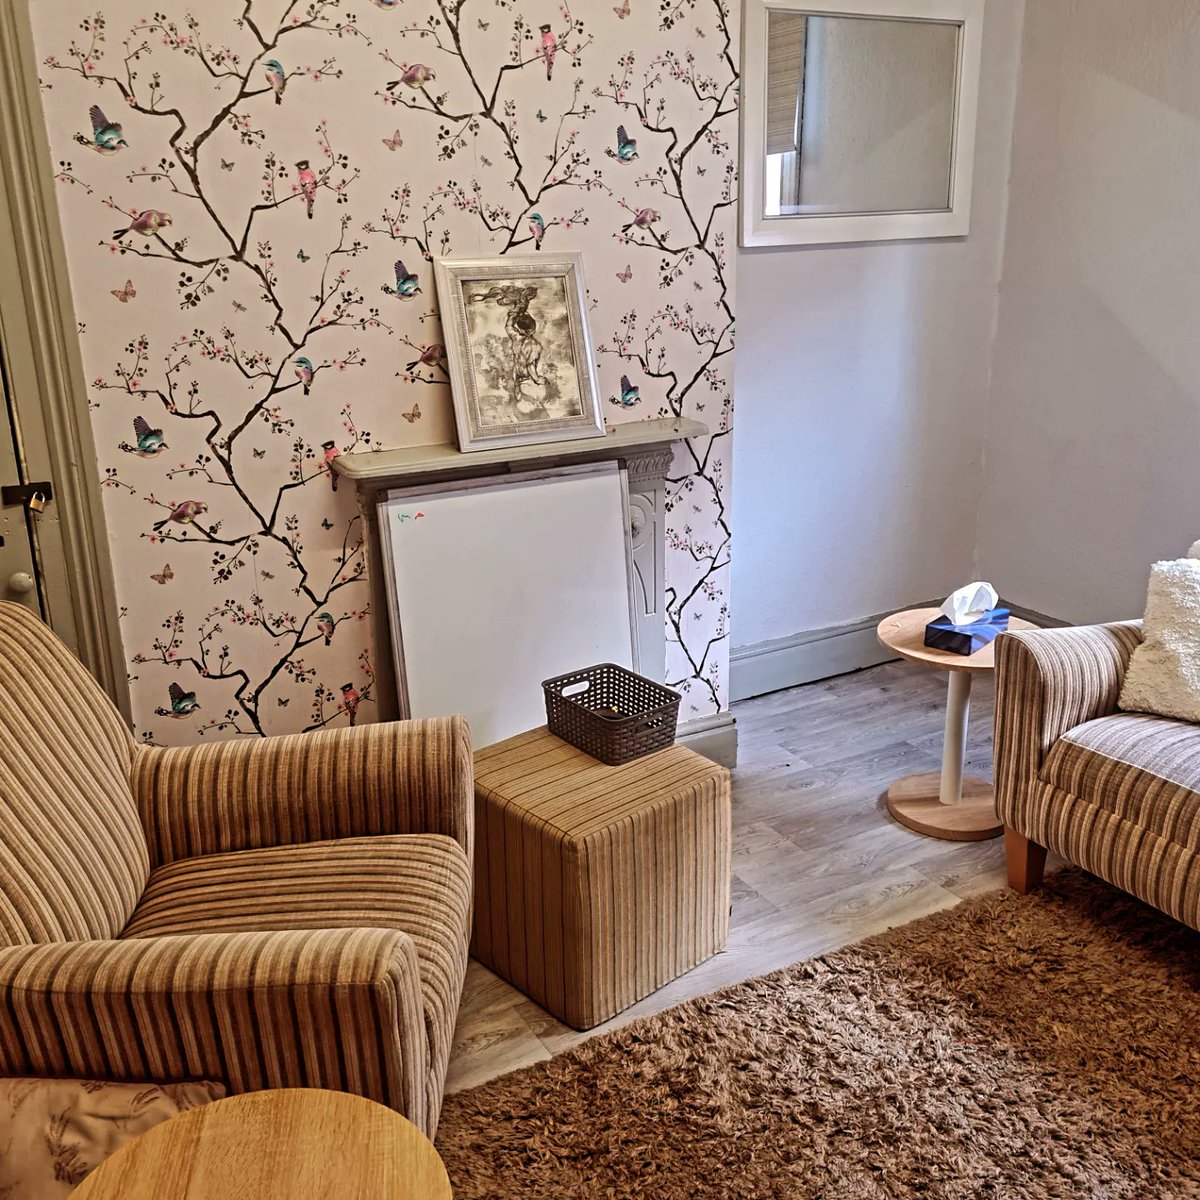 Did you know I offer counselling and coaching? I work from a lovely place in St Helens called Harmony. Here's a few pics to show how cosy it is. I have availability at the moment. I work with anyone over 16 and specialise in providing therapy for care experienced people. 💜